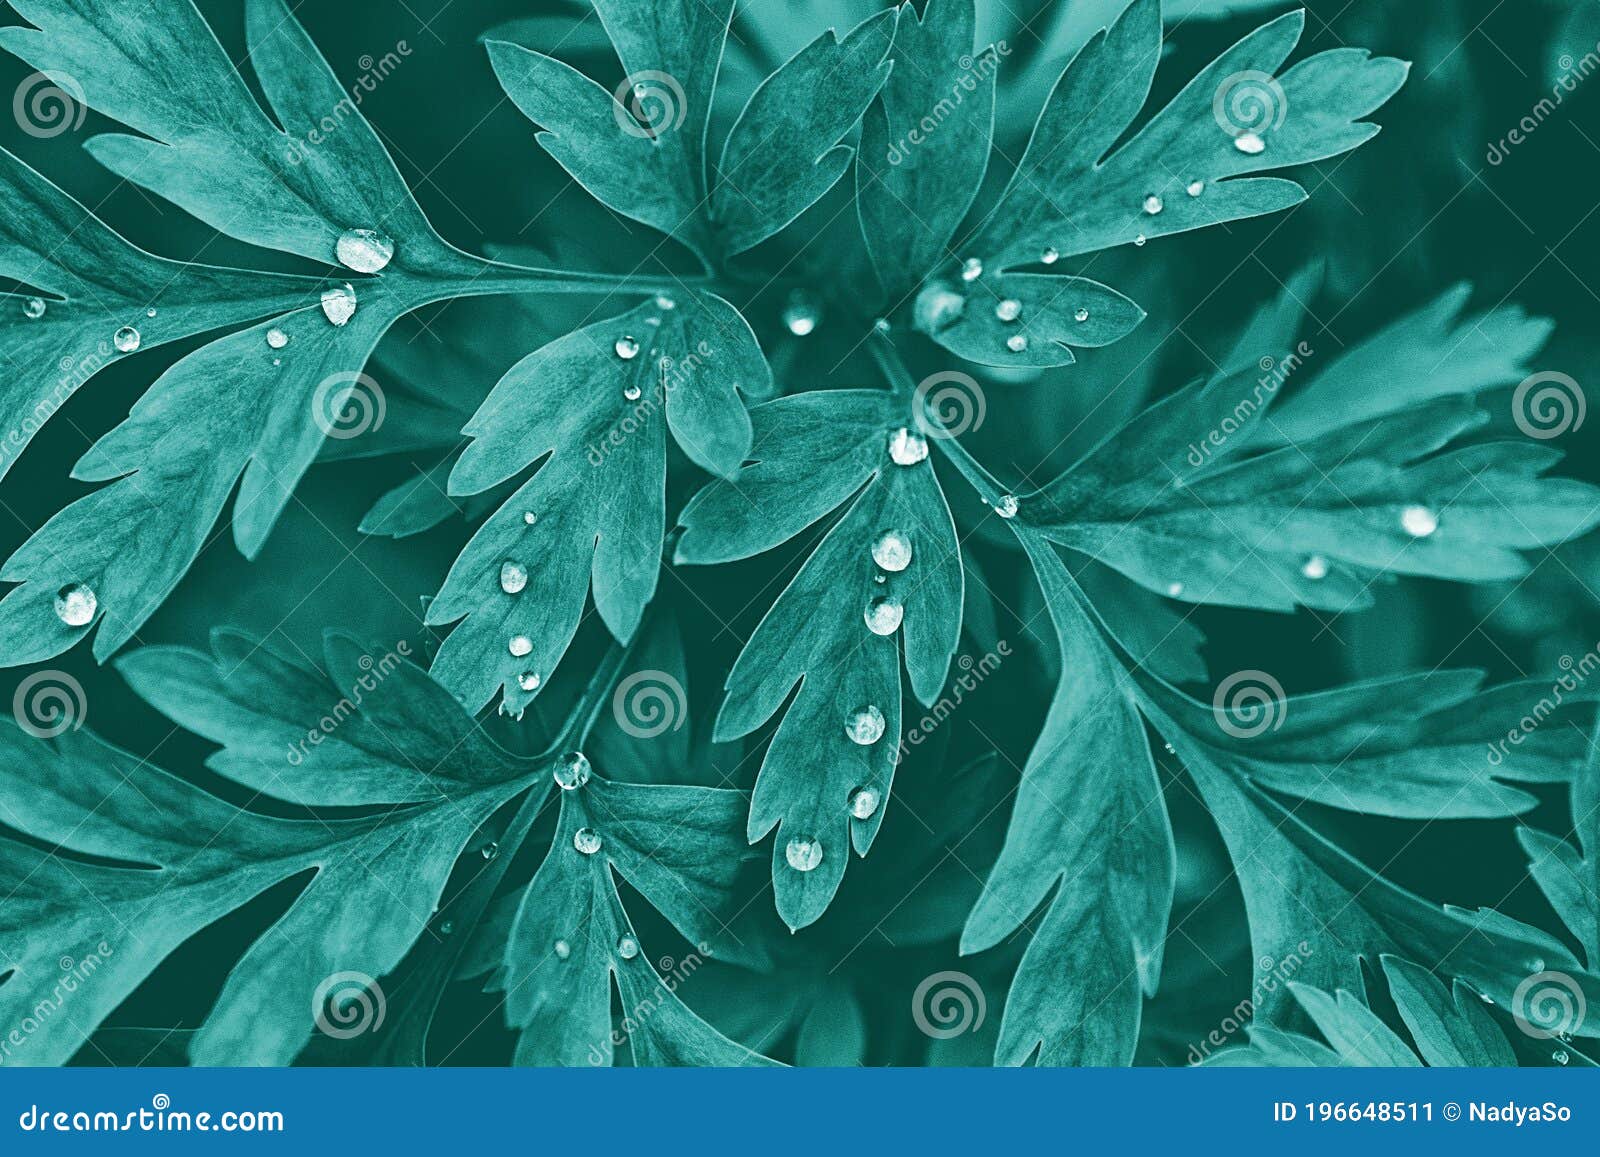 plant blue-green lobed leaves with water drops, botanical dark background